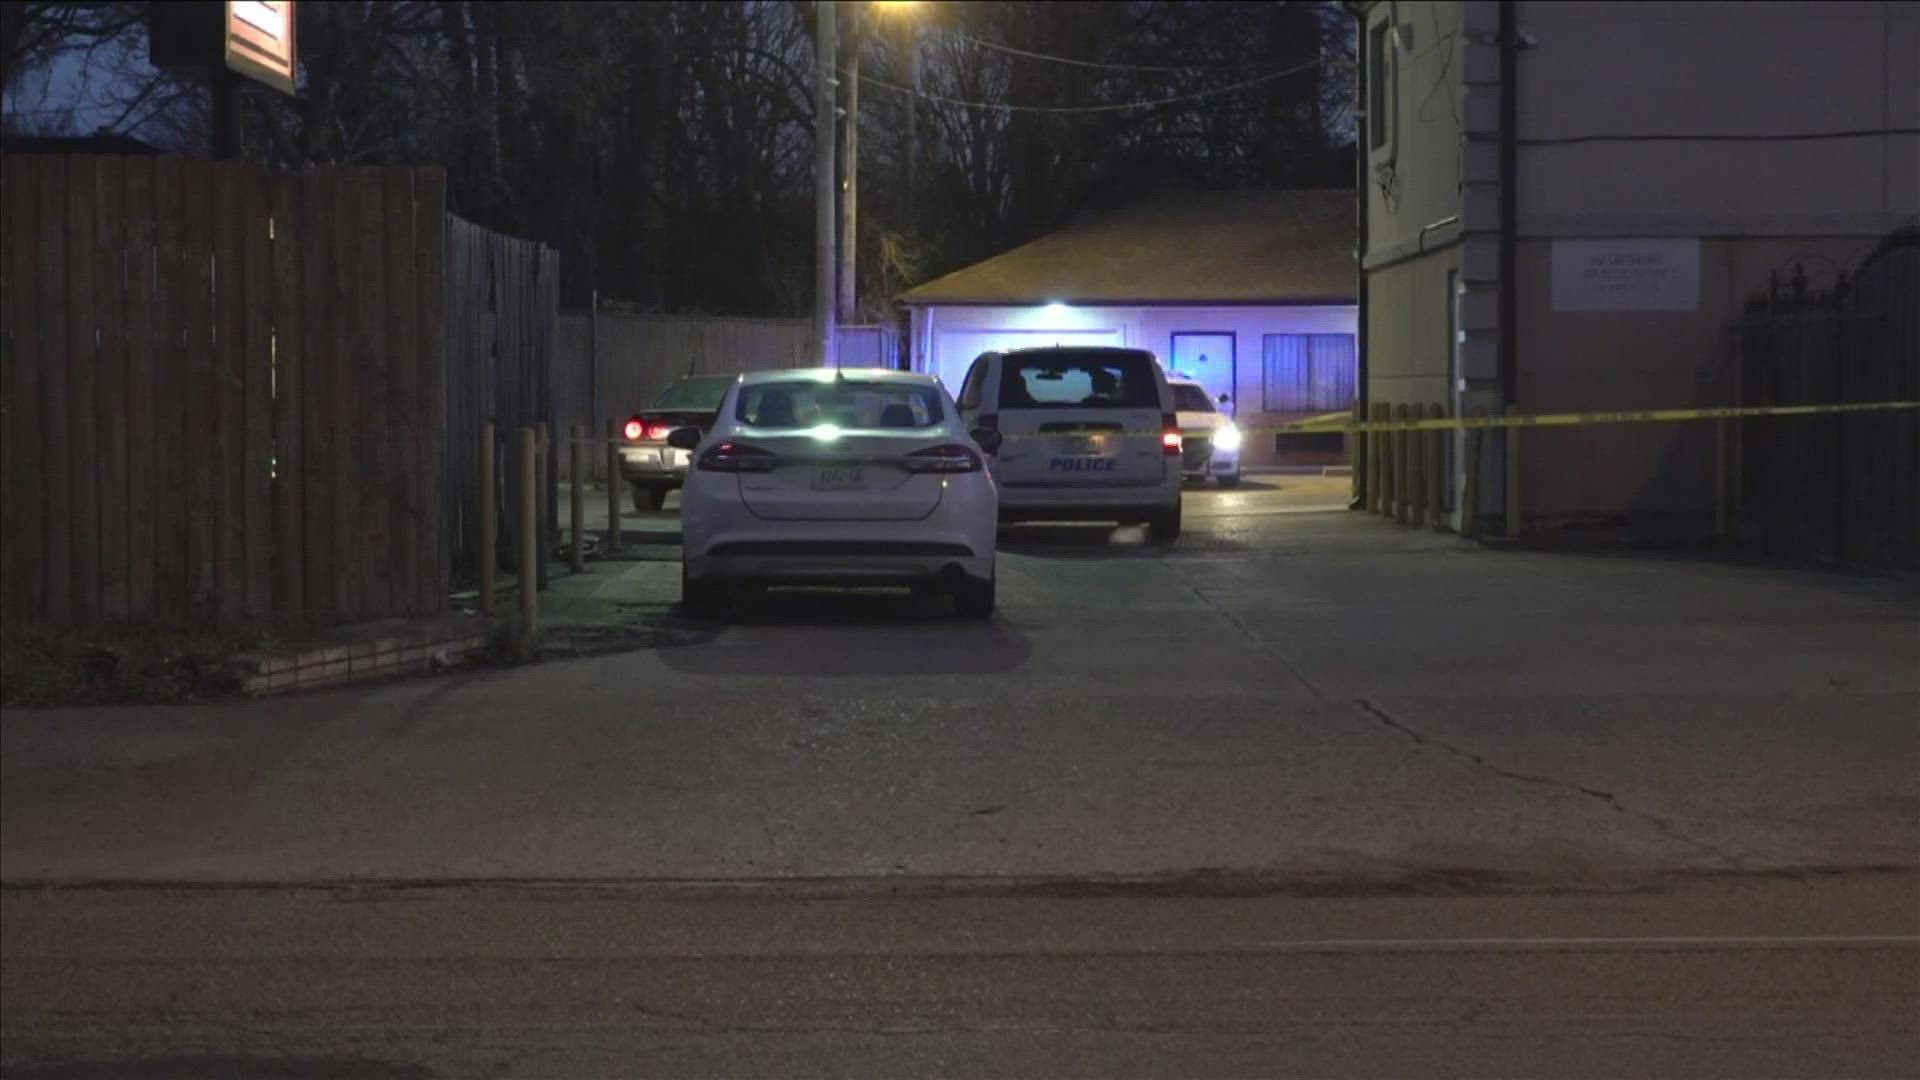 Officers were called to a shooting just after5:30 a.m. Thursday in the 1100 block of S. Parkway East, not far from S. Bellevue Blvd.